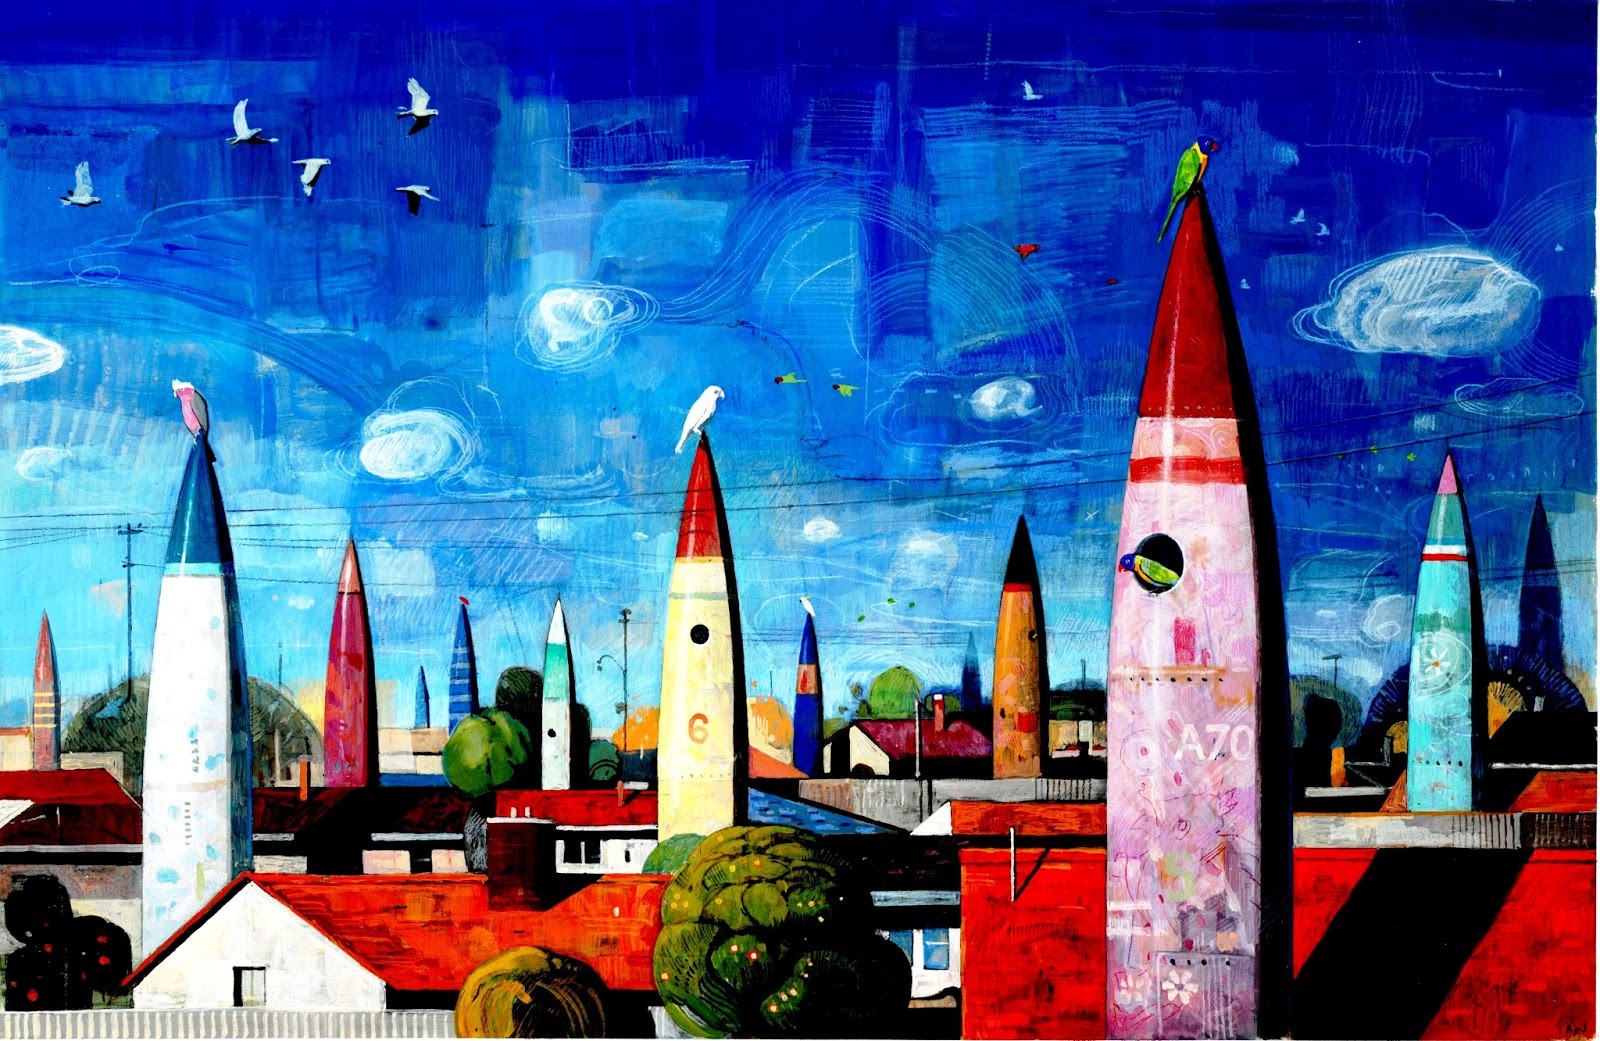 digital art, Fantasy art, Architecture, Building, House, Artwork, Painting, Rocket, Town, Colorful, Birds, Clouds, Rooftops, Missiles, Trees Wallpaper